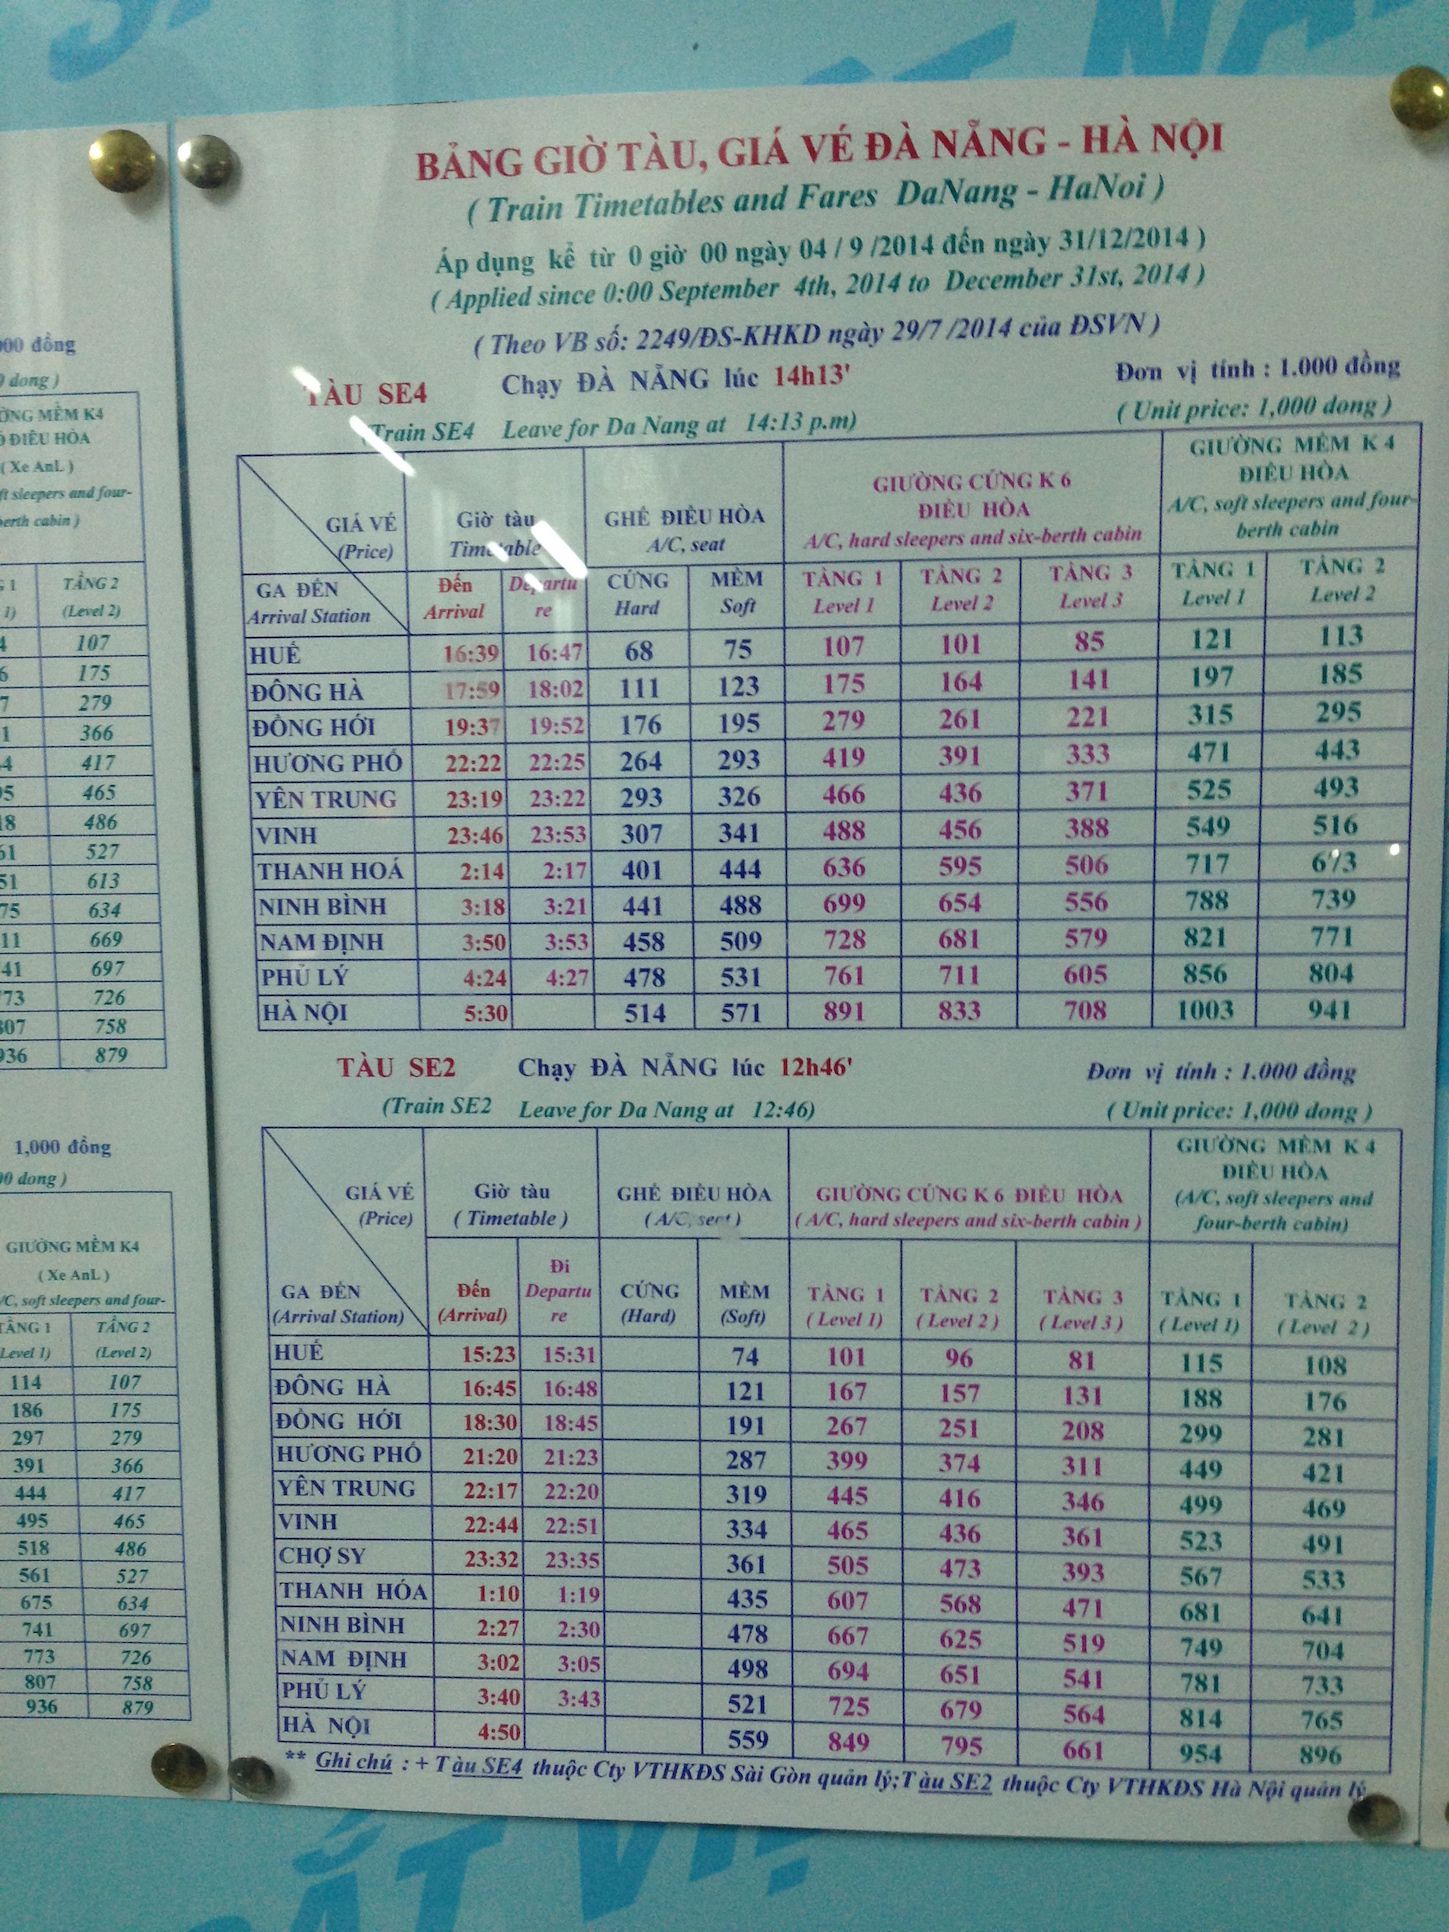 Train ticket price table at train station